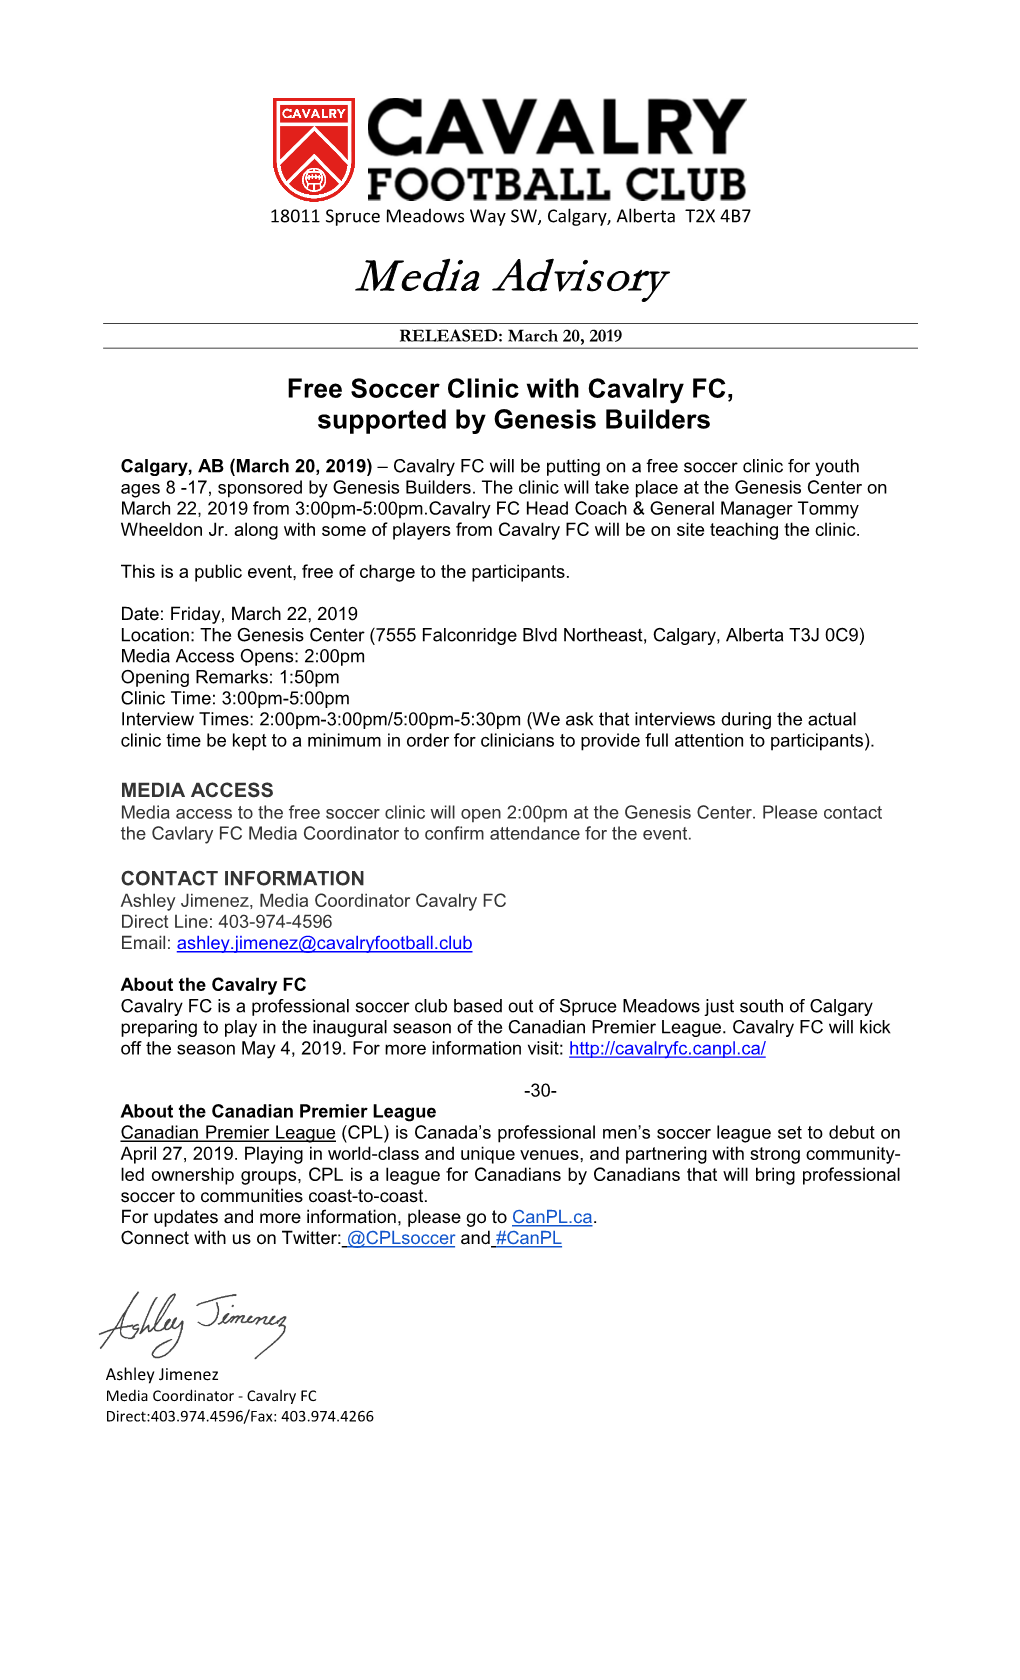 Free Soccer Clinic with Cavalry FC, Supported by Genesis Builders